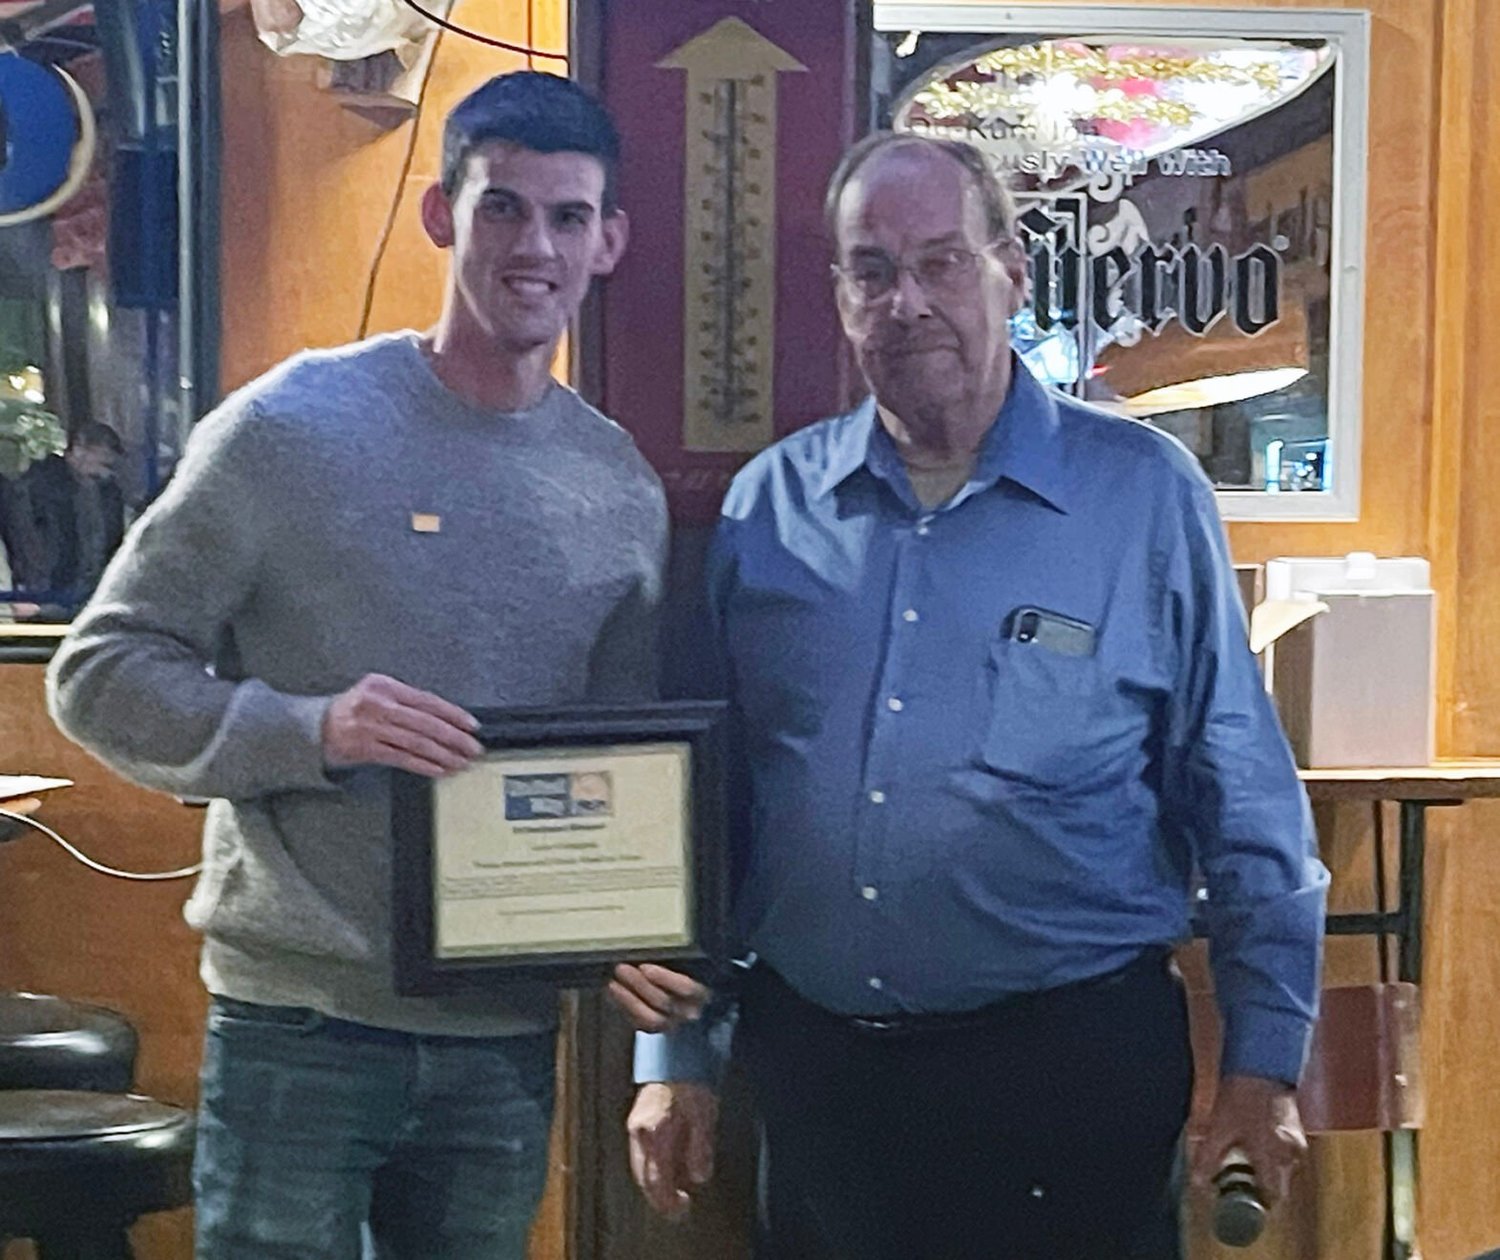 Luke Callaghan of Kirksville Parks and Recreation and a UW Board member is recognized for his fundraising leadership of the UWNEMO Texas Hold’em Tournaments and annual Trivia Contest. Pictured with Callaghan is United Way Executive Director Bill Castles. 